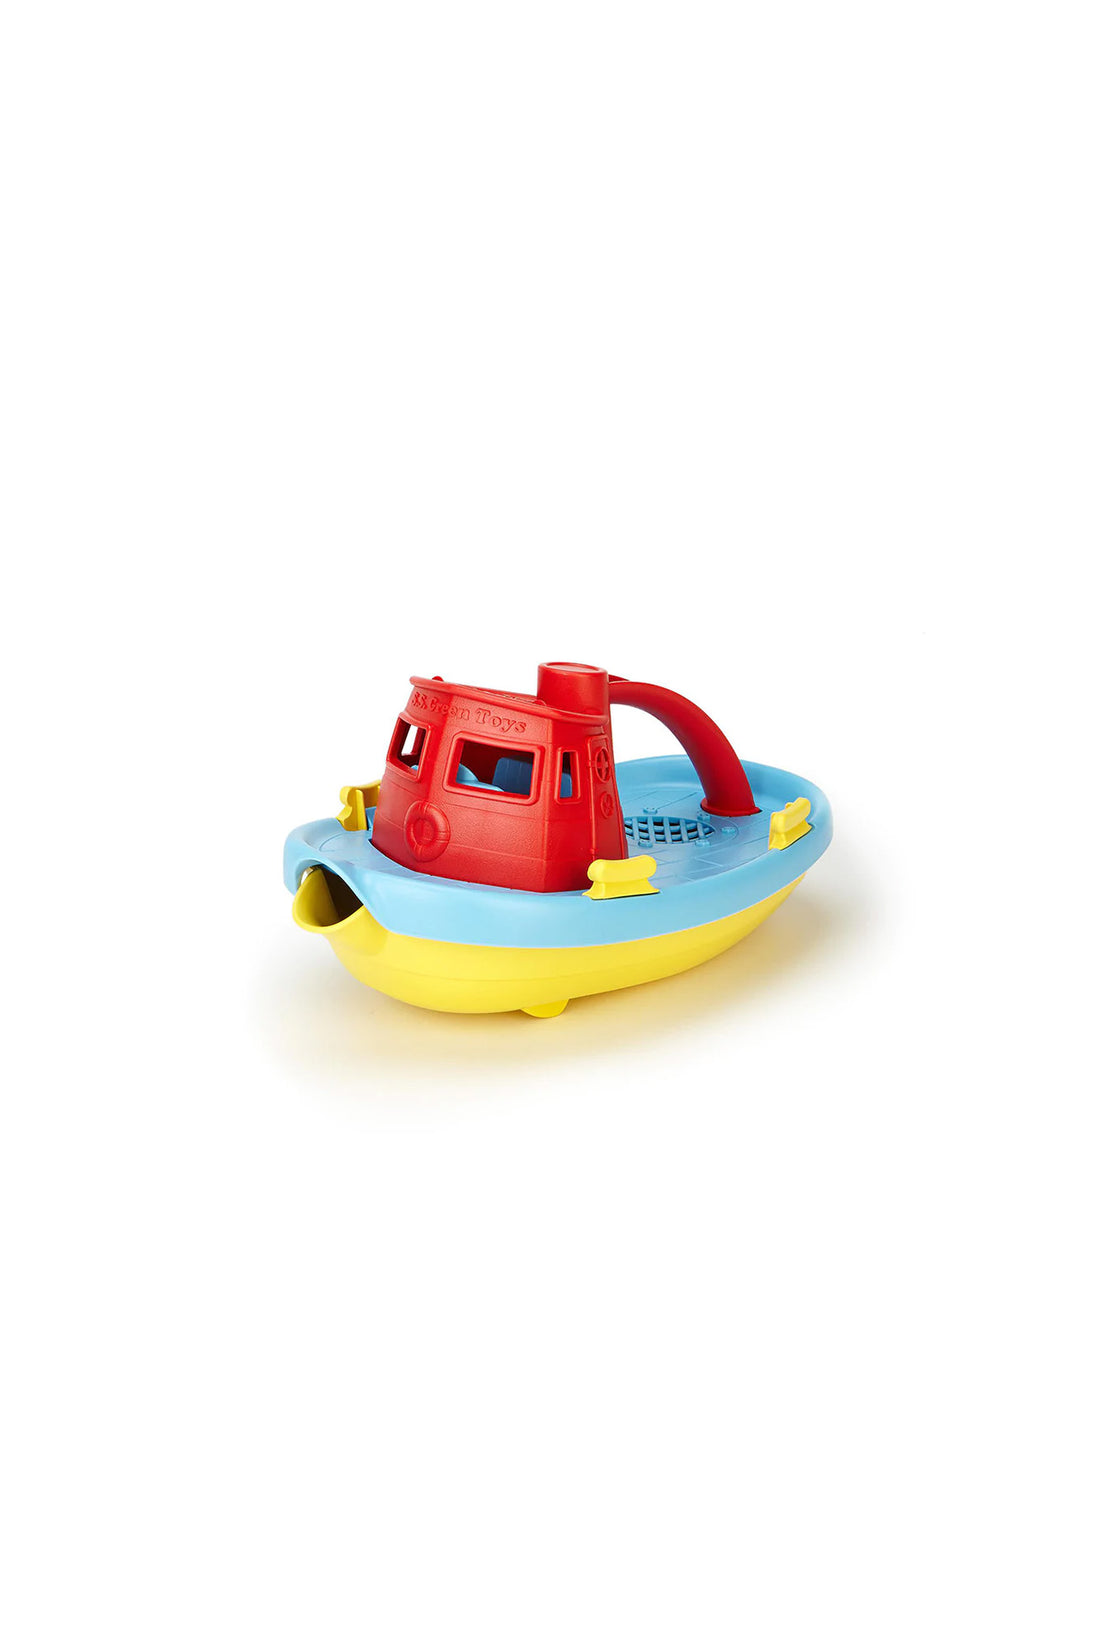 GREEN TOYS TUGBOAT RED